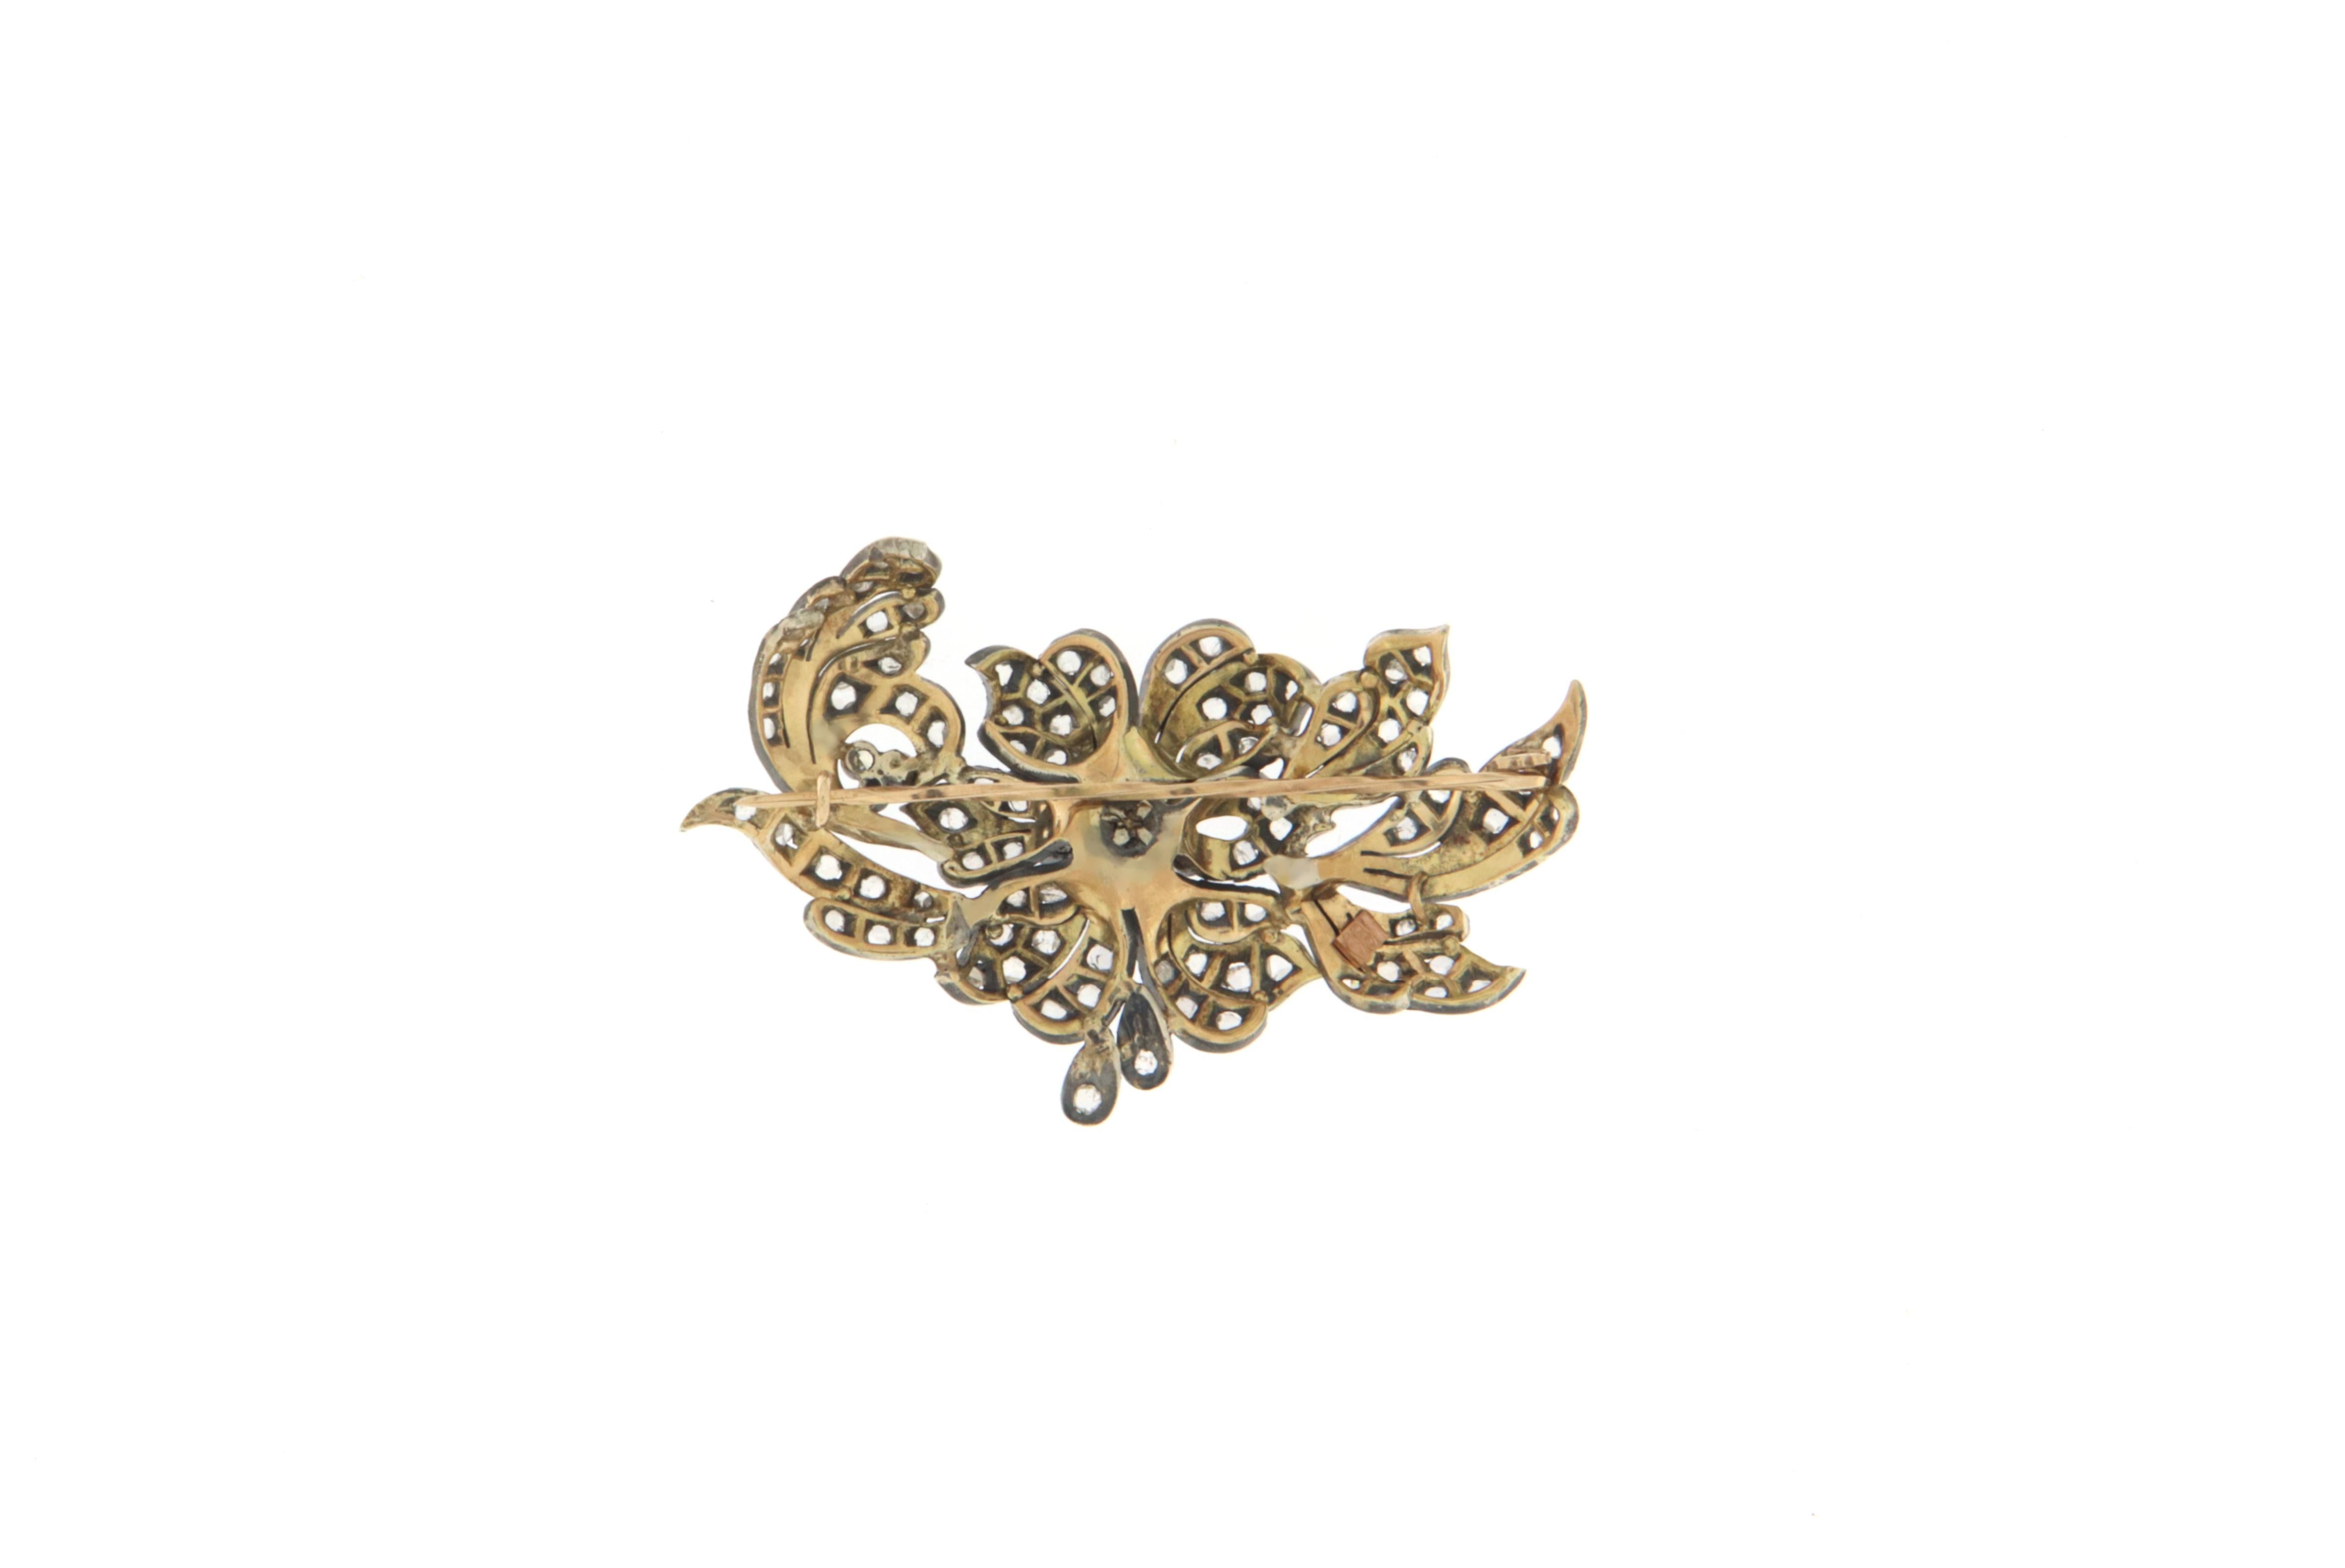 Antique brooch 14 karat yellow gold and 800 thousandths created entirely by hand with diamonds
Studded with old-cut diamonds that sparkle in the flowers and leaves of this brooch.
Dated 1950s
Delicious brooch with a floral motif depicting a flower